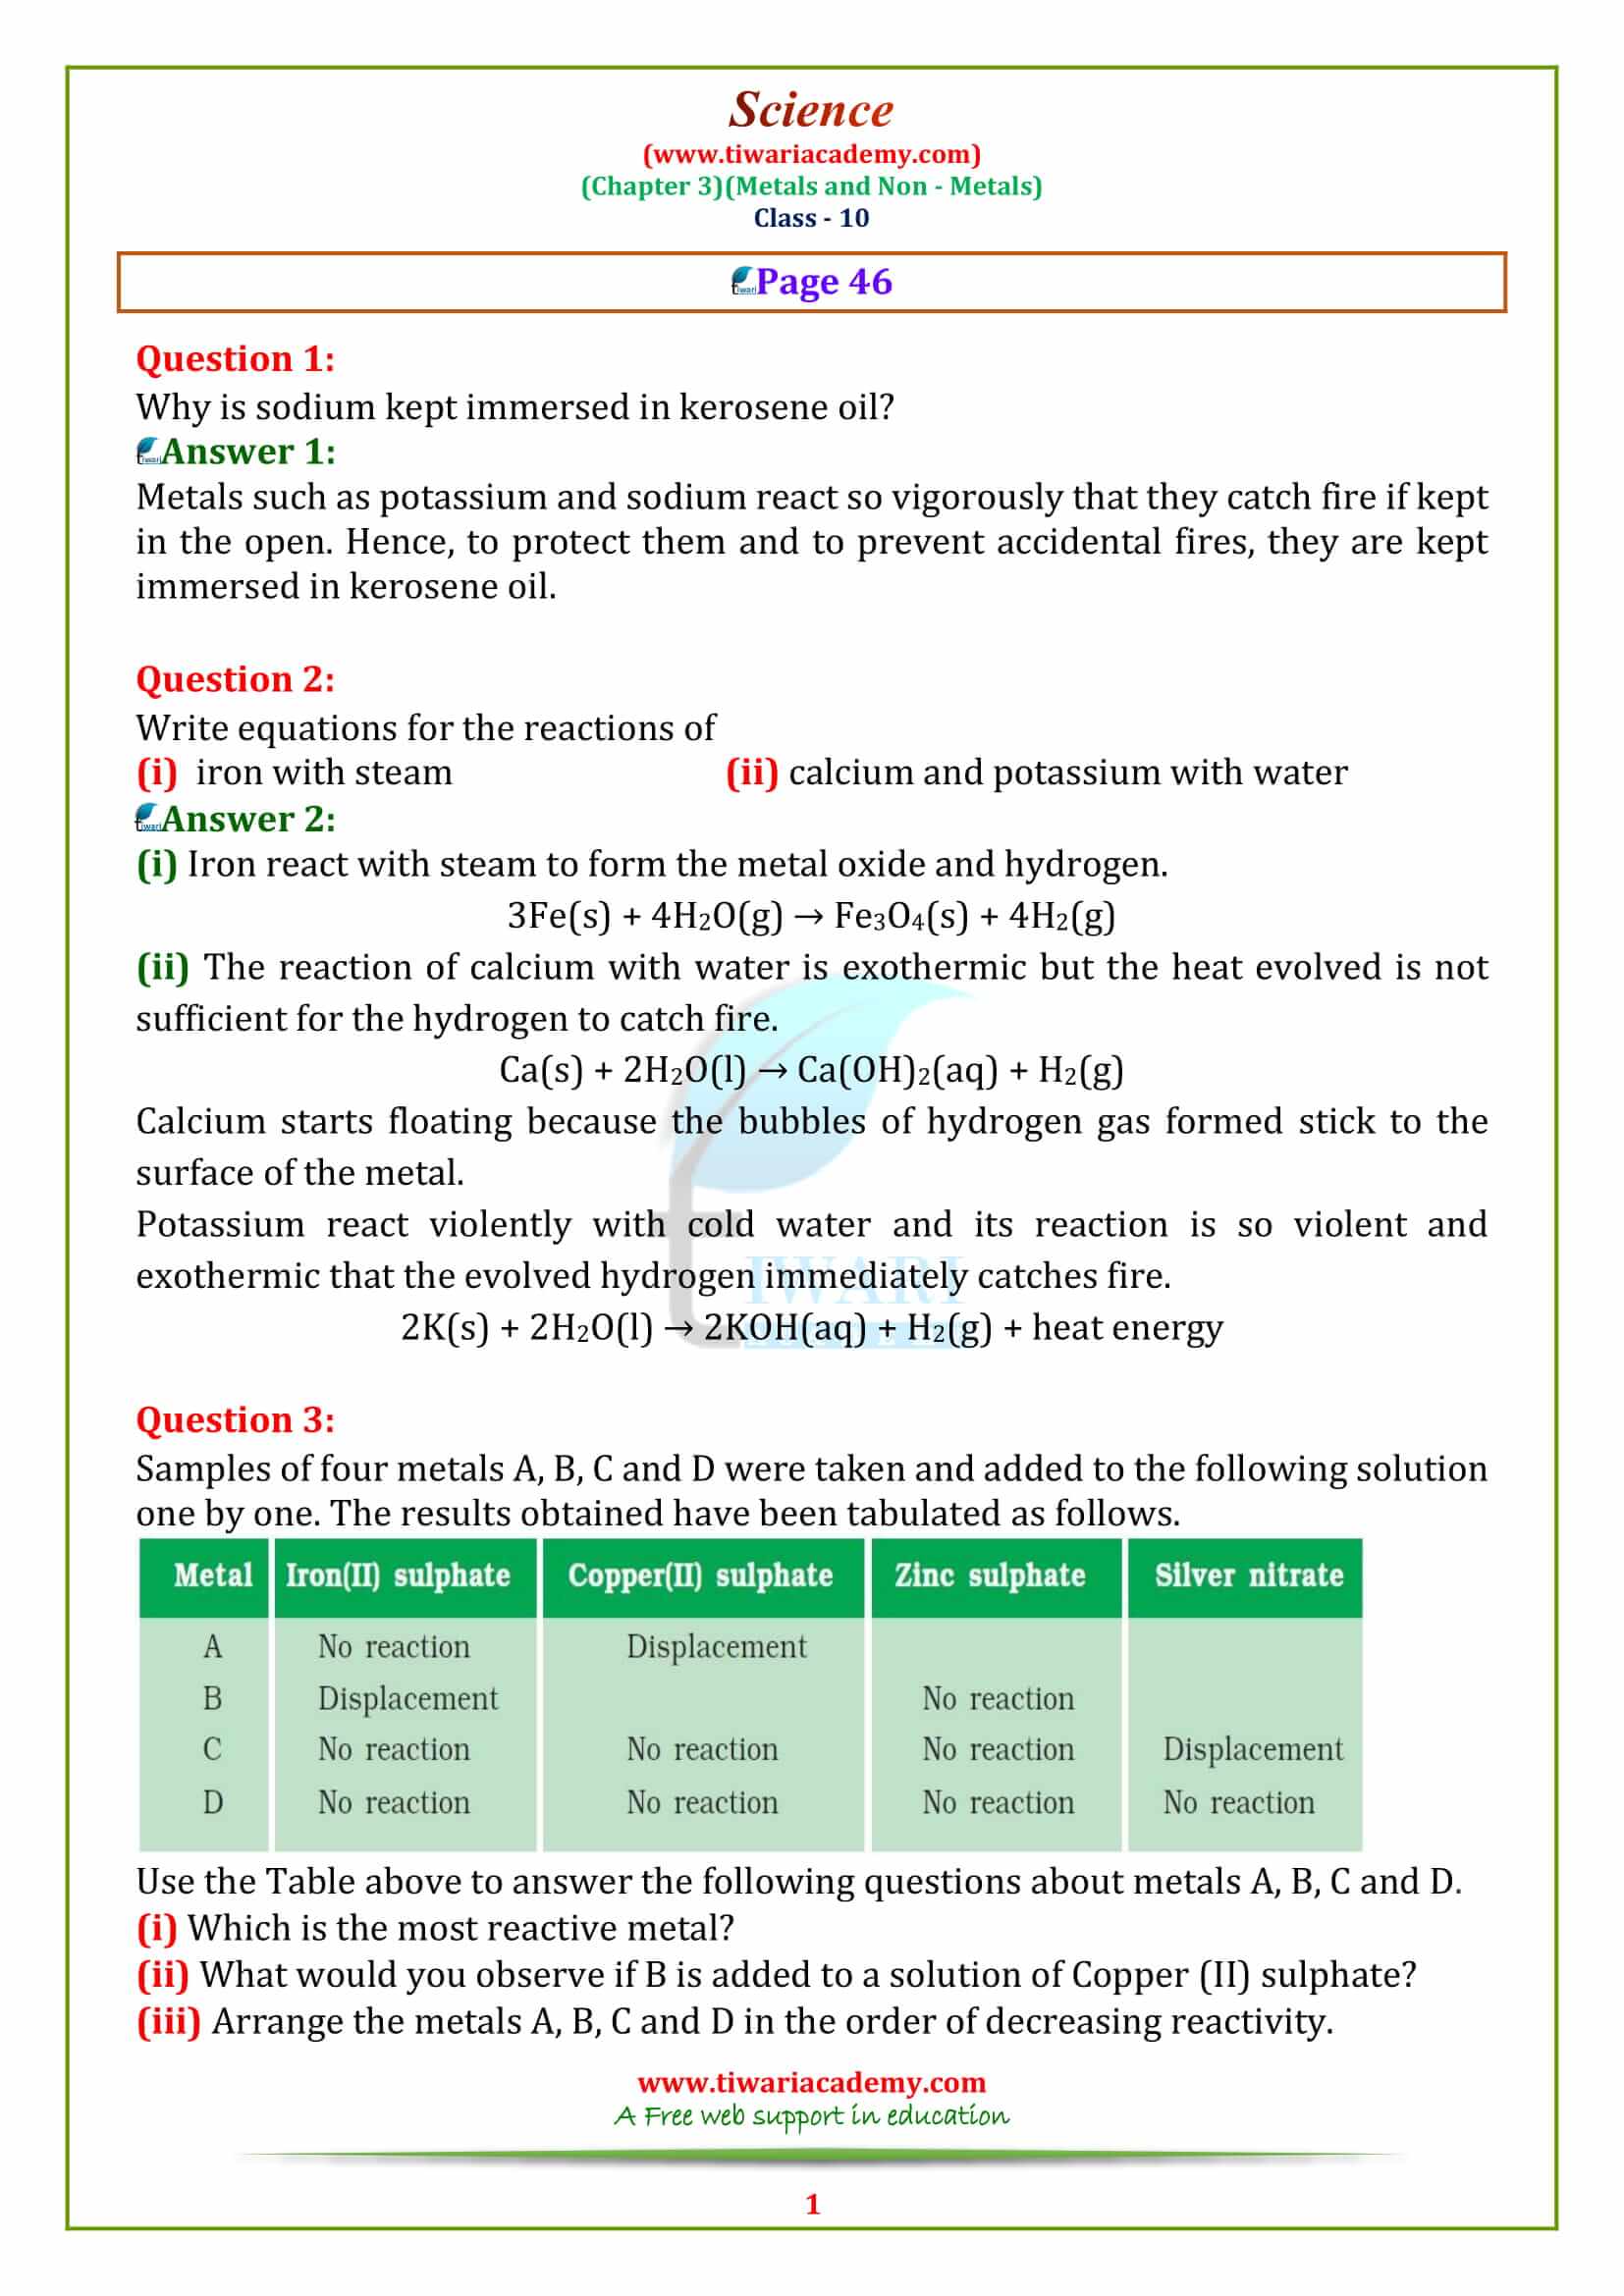 NCERT Solutions for Class 10 Science Chapter 3 Metals and Non-Metals page 46